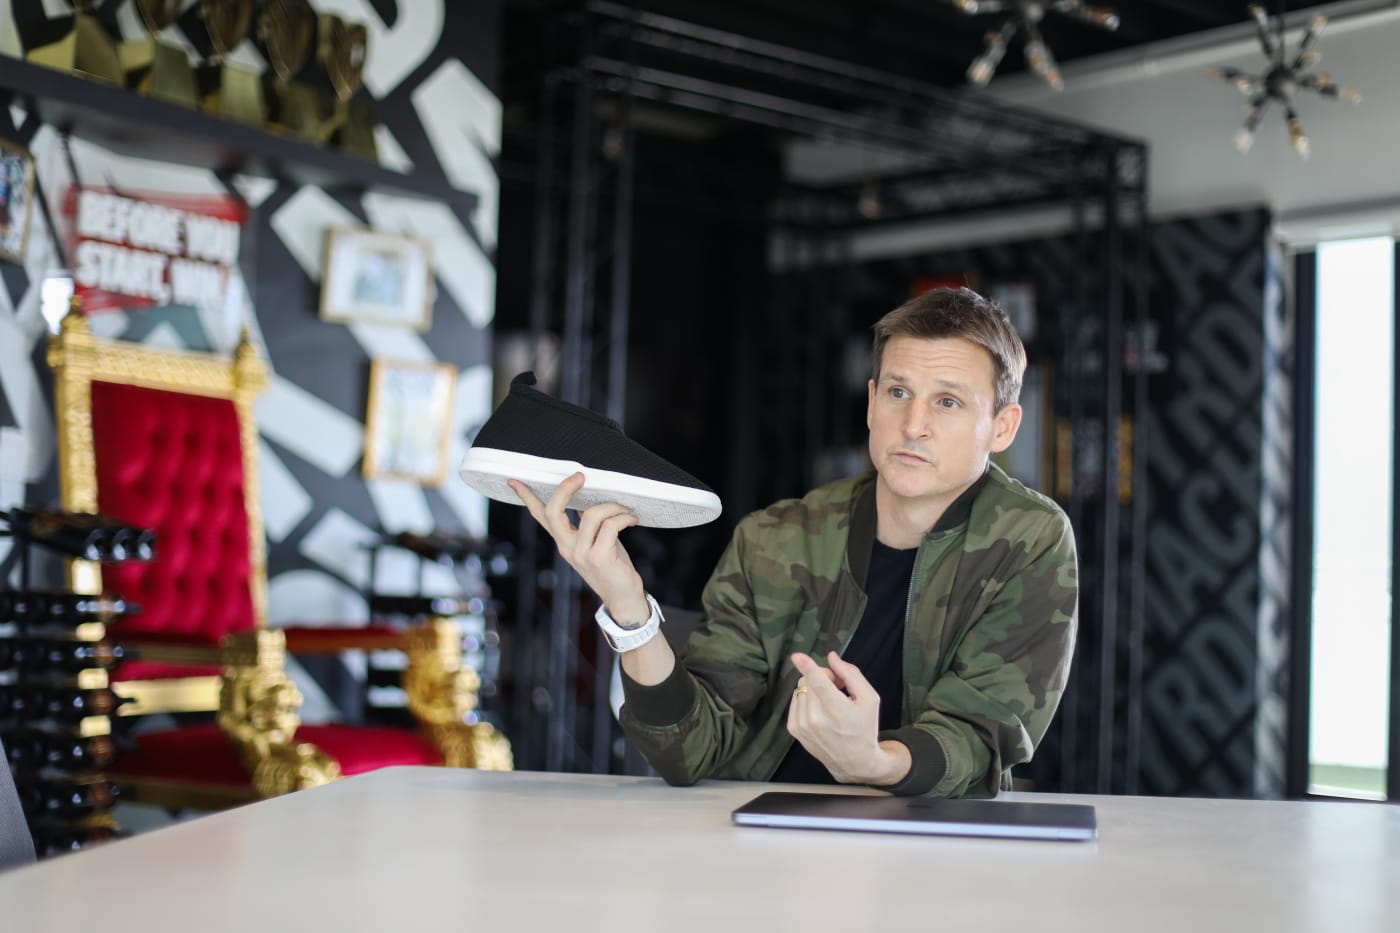 Rob Dyrdek in 2021, still with his love for sneakers. Image via Publicist